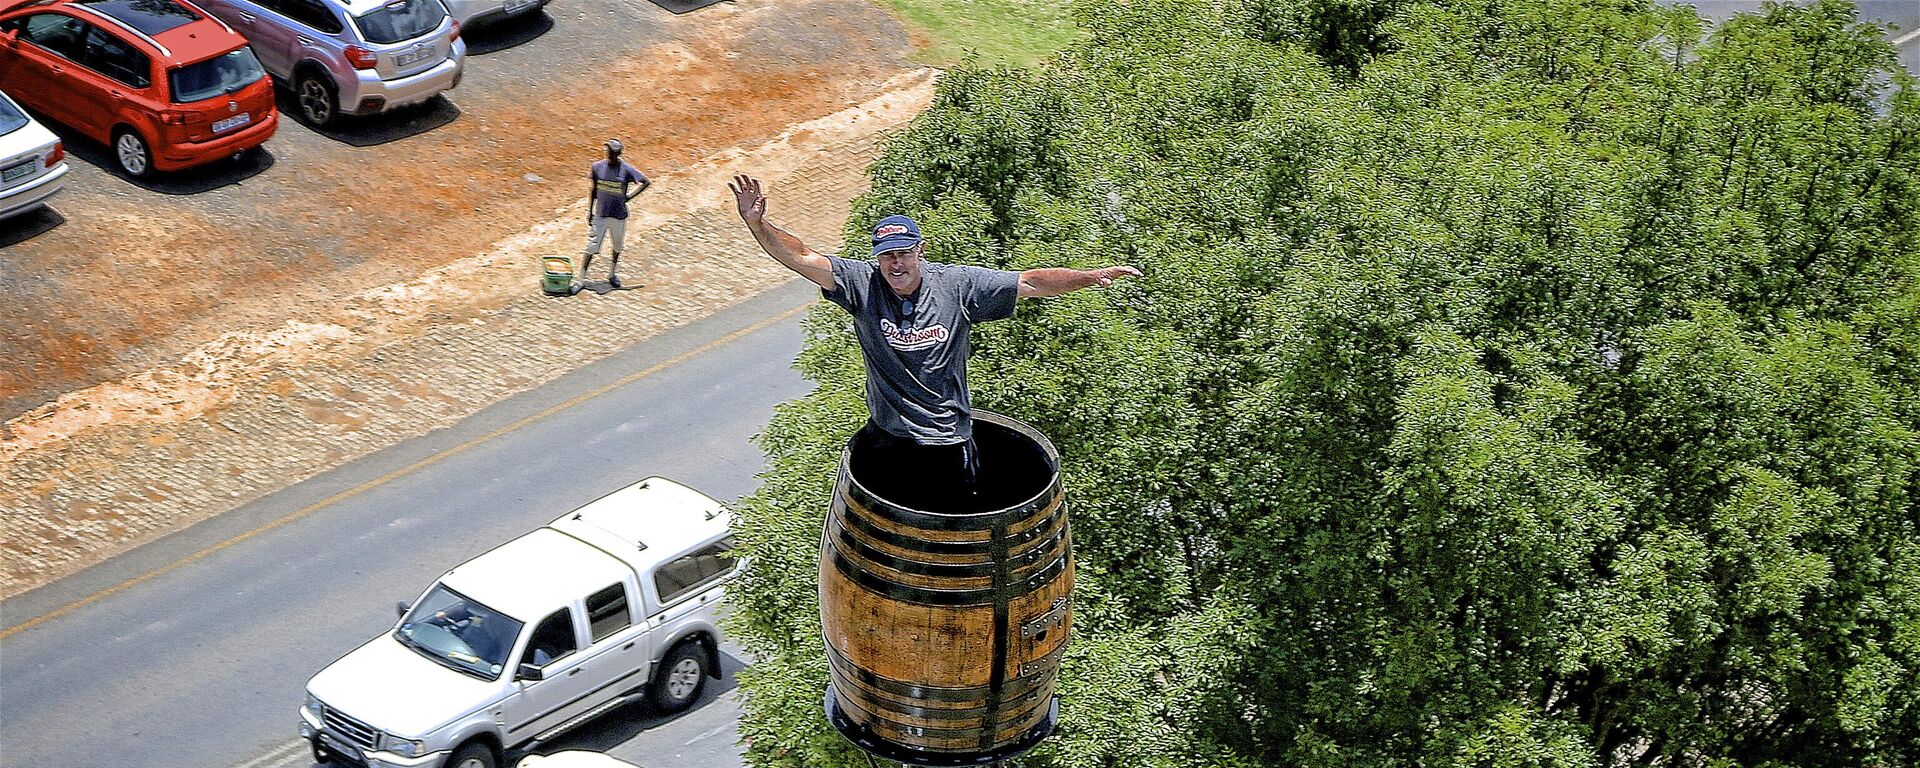 In this photo taken Nov. 14 2019, Henry Kruger waves from his wine barrel atop a pole in Dullstroom, South Africa, where he spent his 70th day, Friday Jan. 24, 2019. Kruger has broken his own record of 67 days set in 1997 according to the Guinness World Book of Records and continues his sitting feat.  - Sputnik Africa, 1920, 20.05.2023